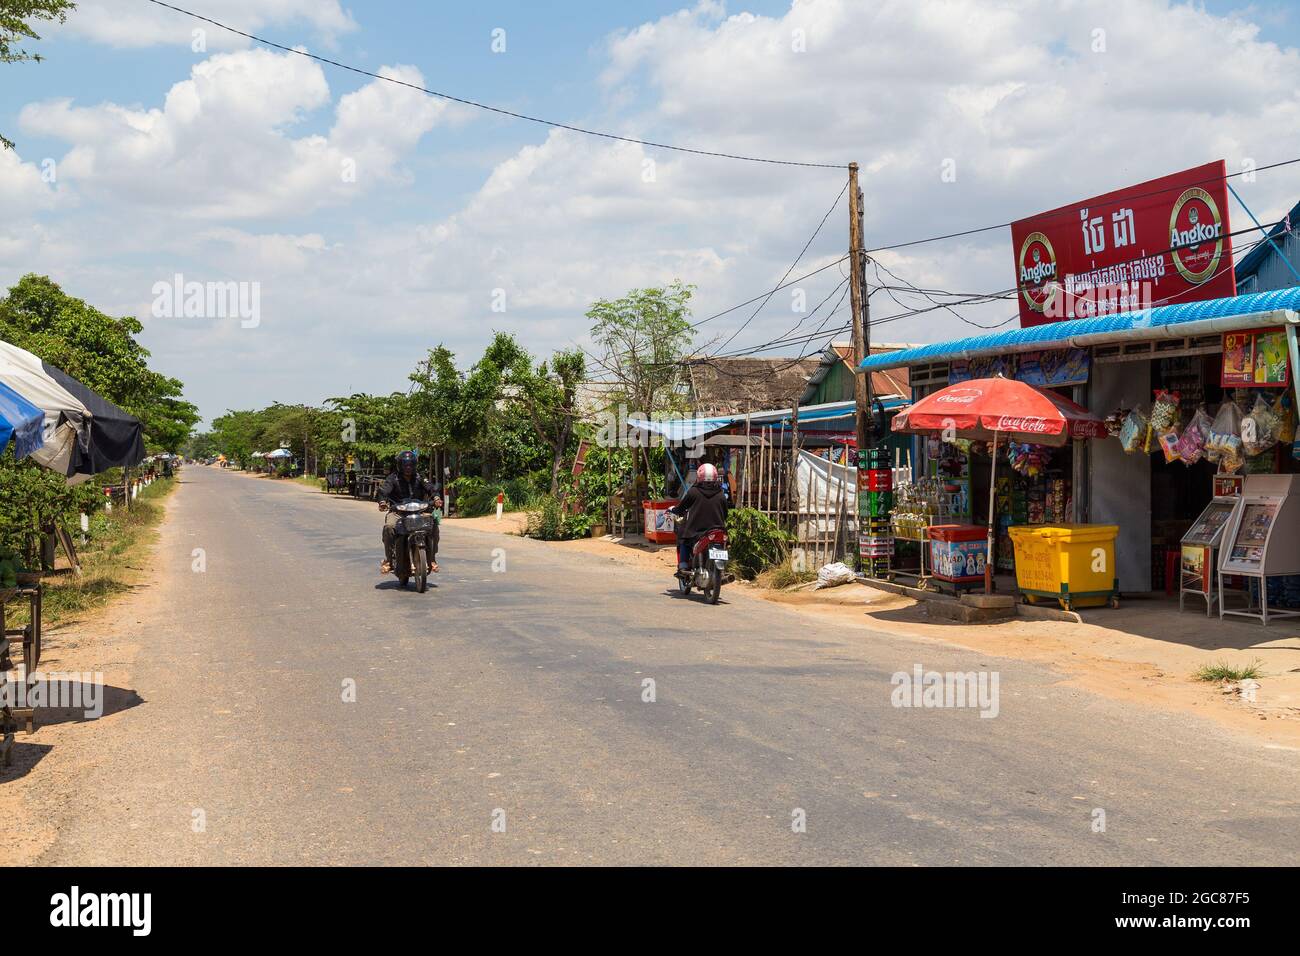 CAMBODIA - 28TH MARCH 2017: Rural  roads and streets in Cambodia near Siem Reap. The outside of shops and people can be seen. Stock Photo